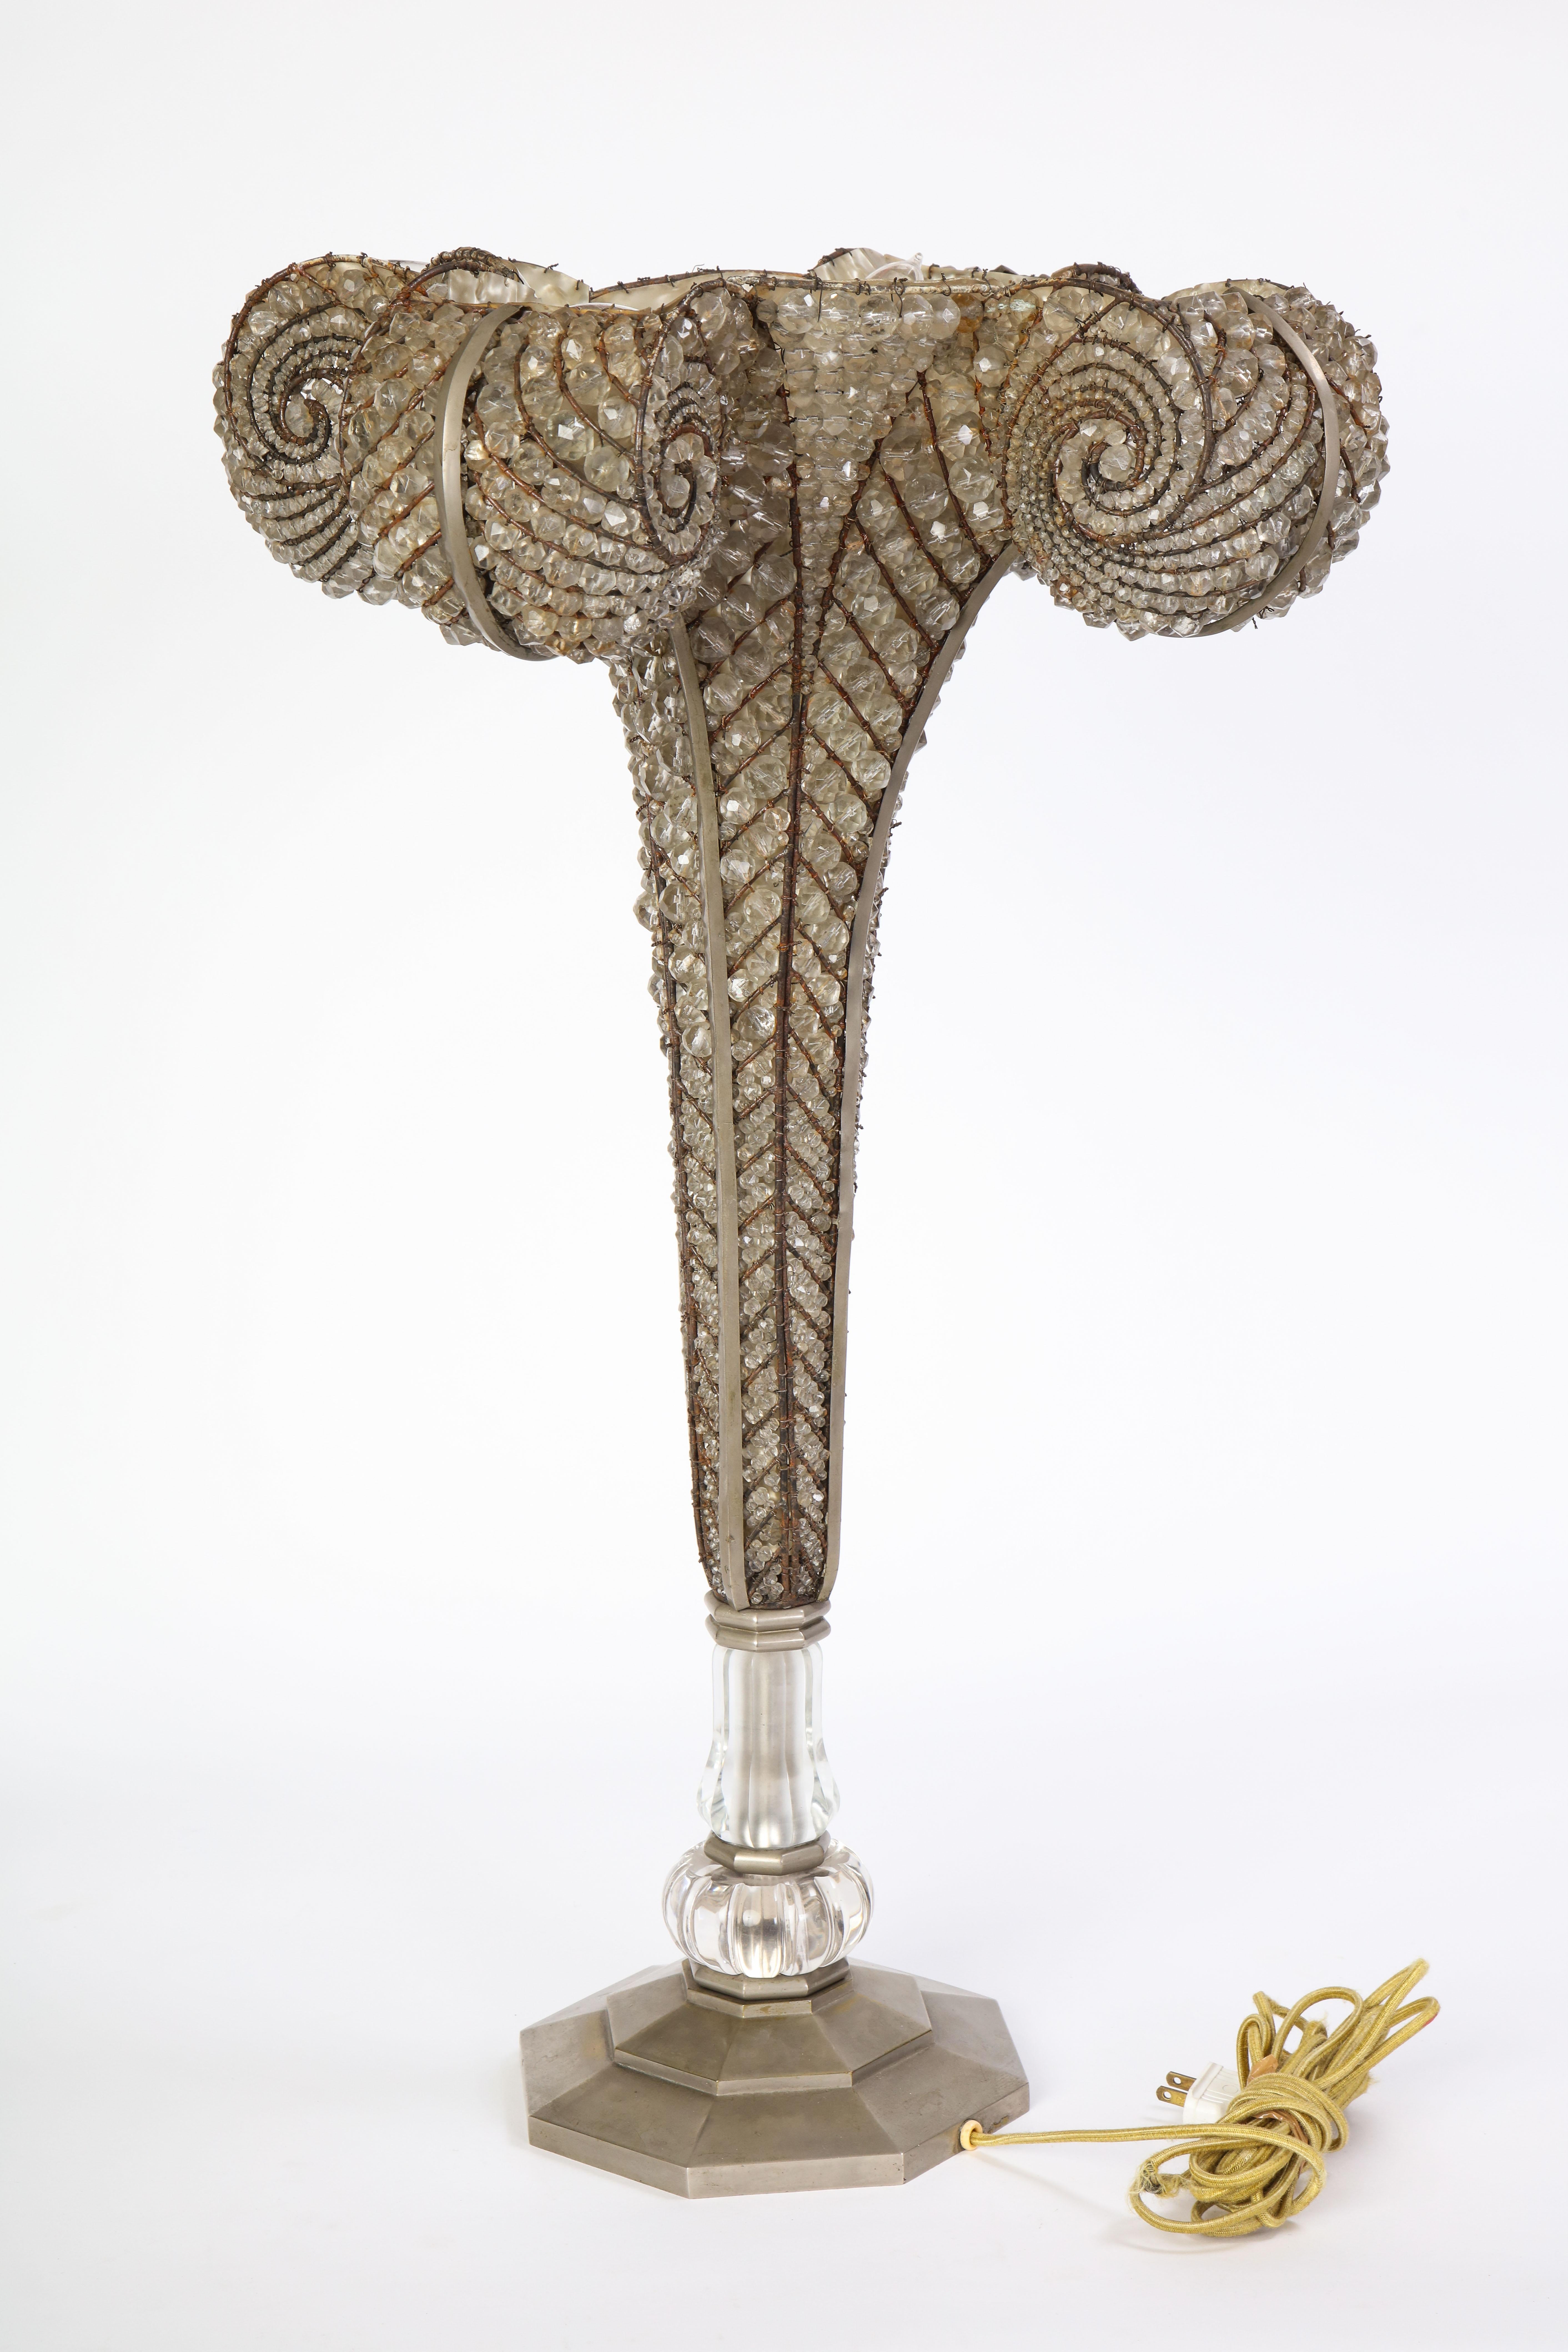 French Beaded Glass Table Lamp, Attributed To Maison Bagues, Circa 1925 For Sale 10